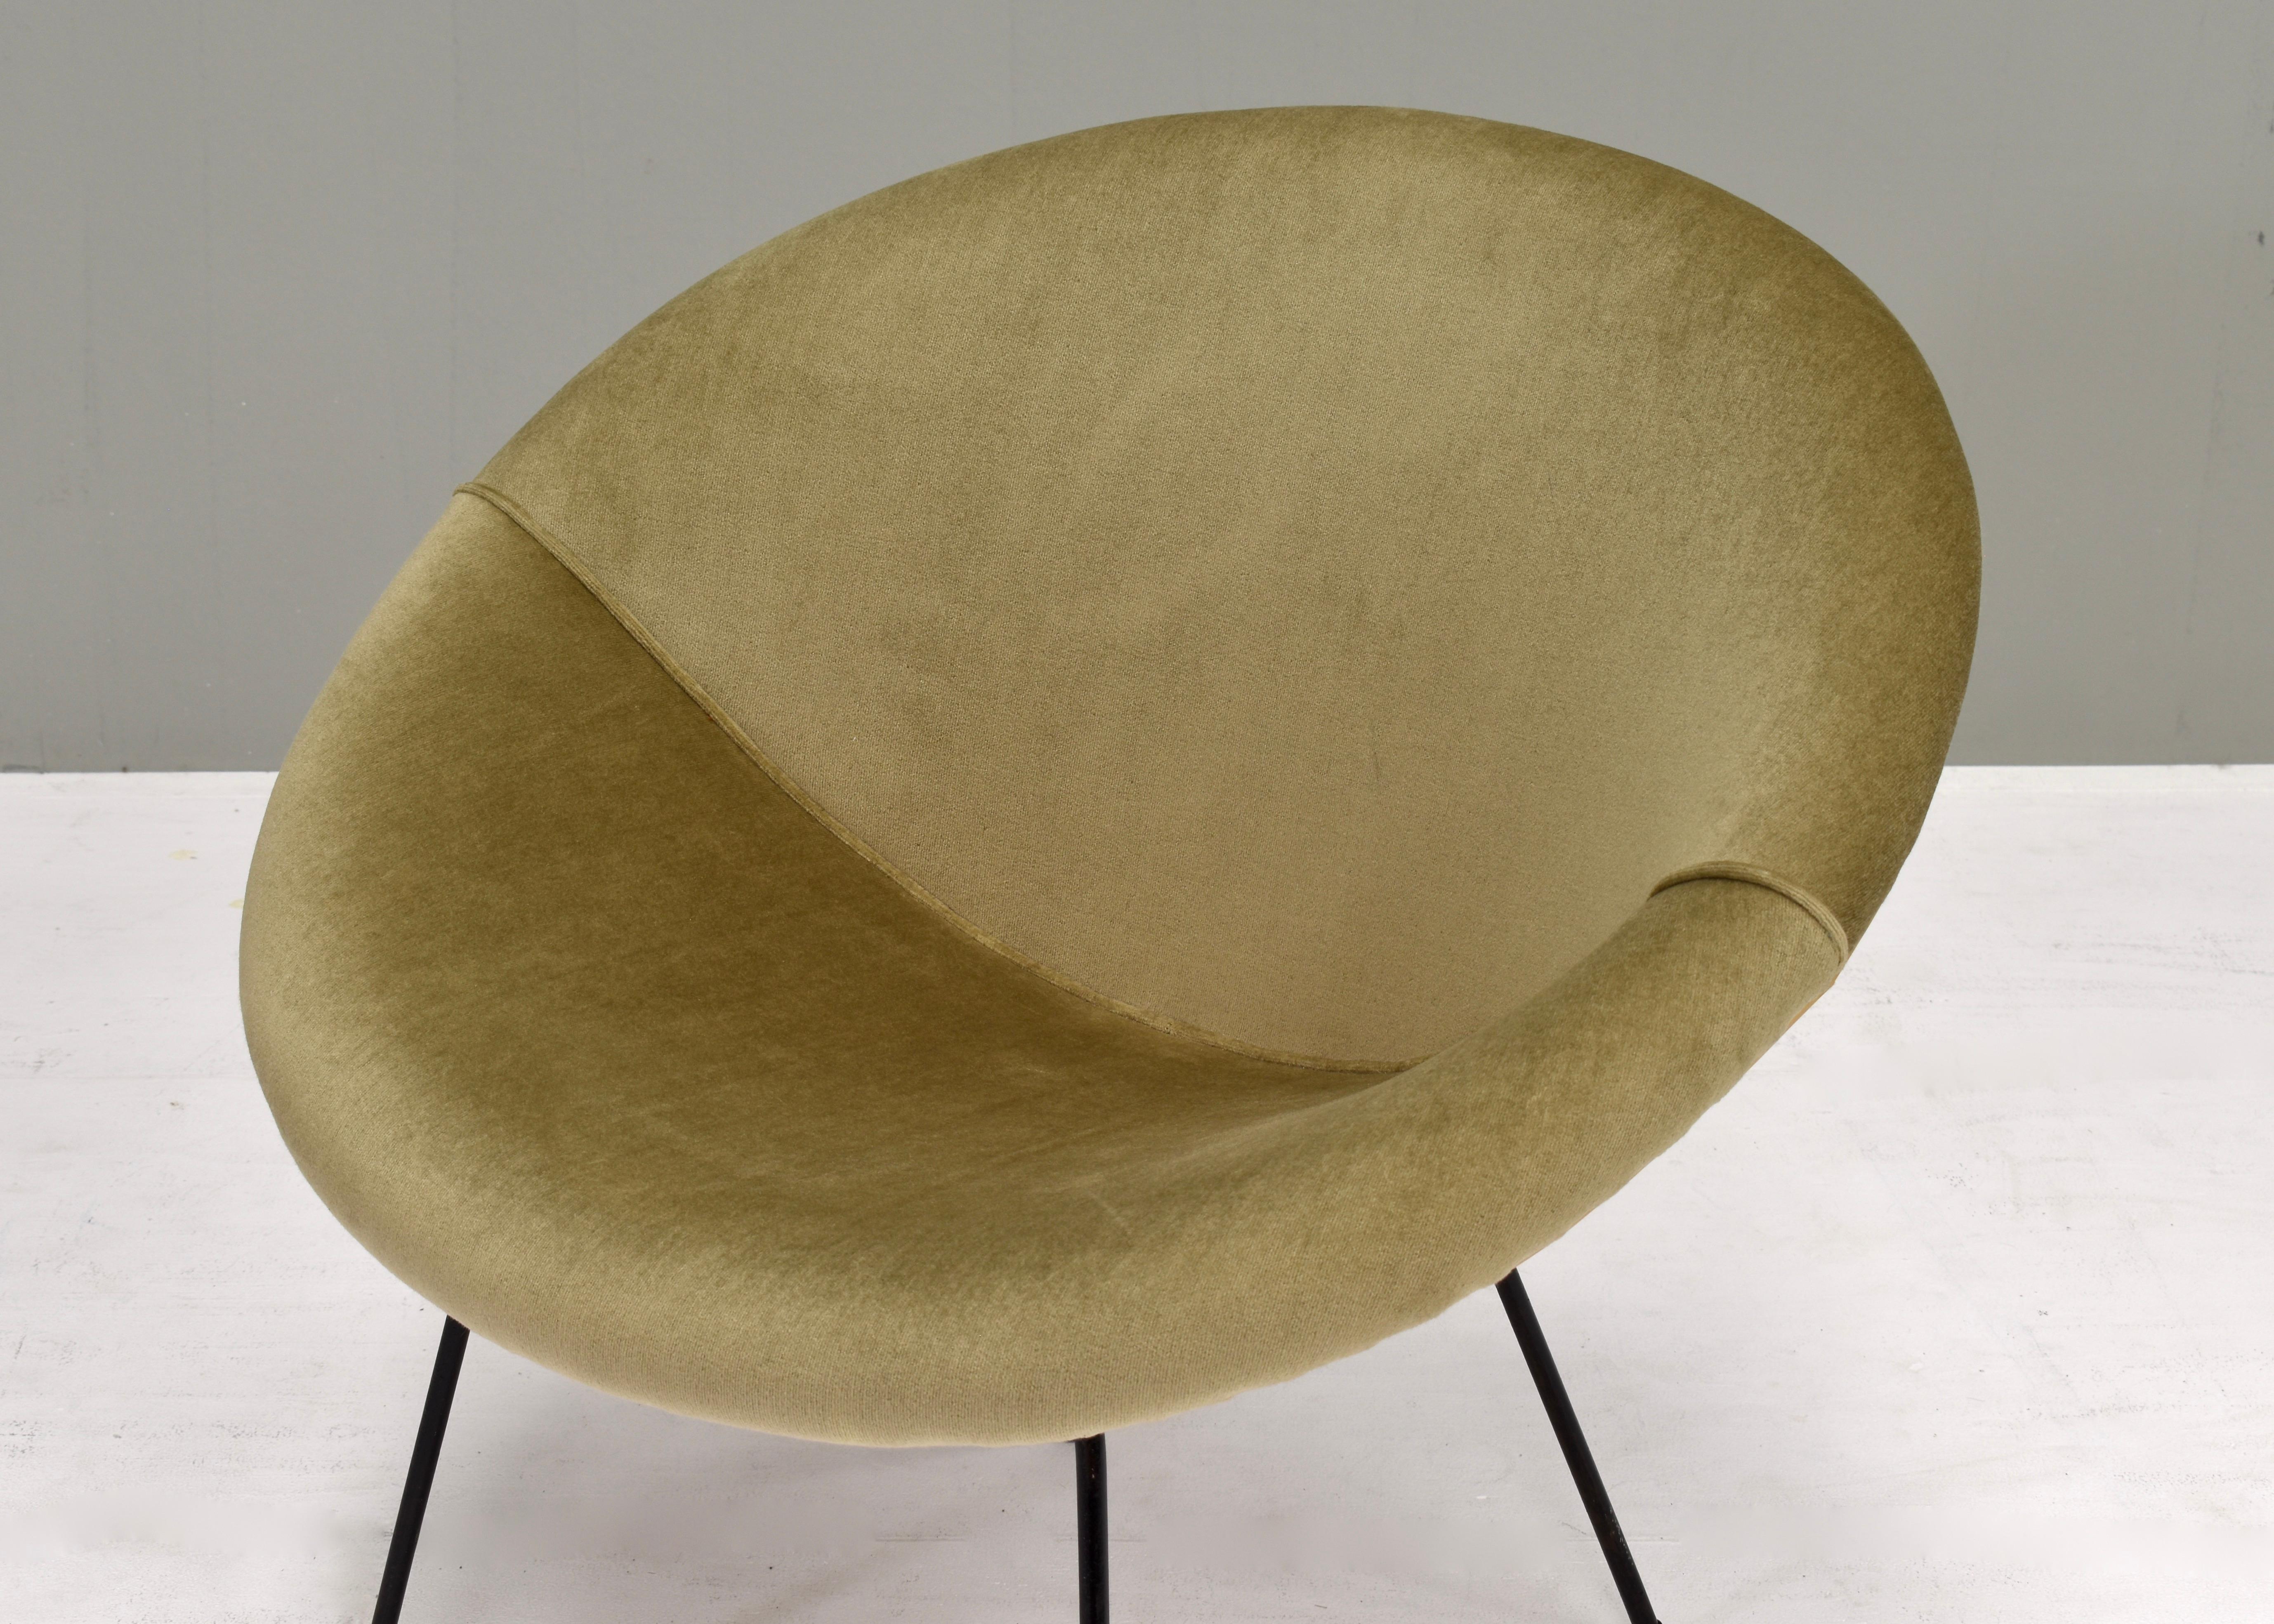 Sculptural Circle Chair in Original Mohair Velvet and Black Metal Base, 1950's For Sale 10